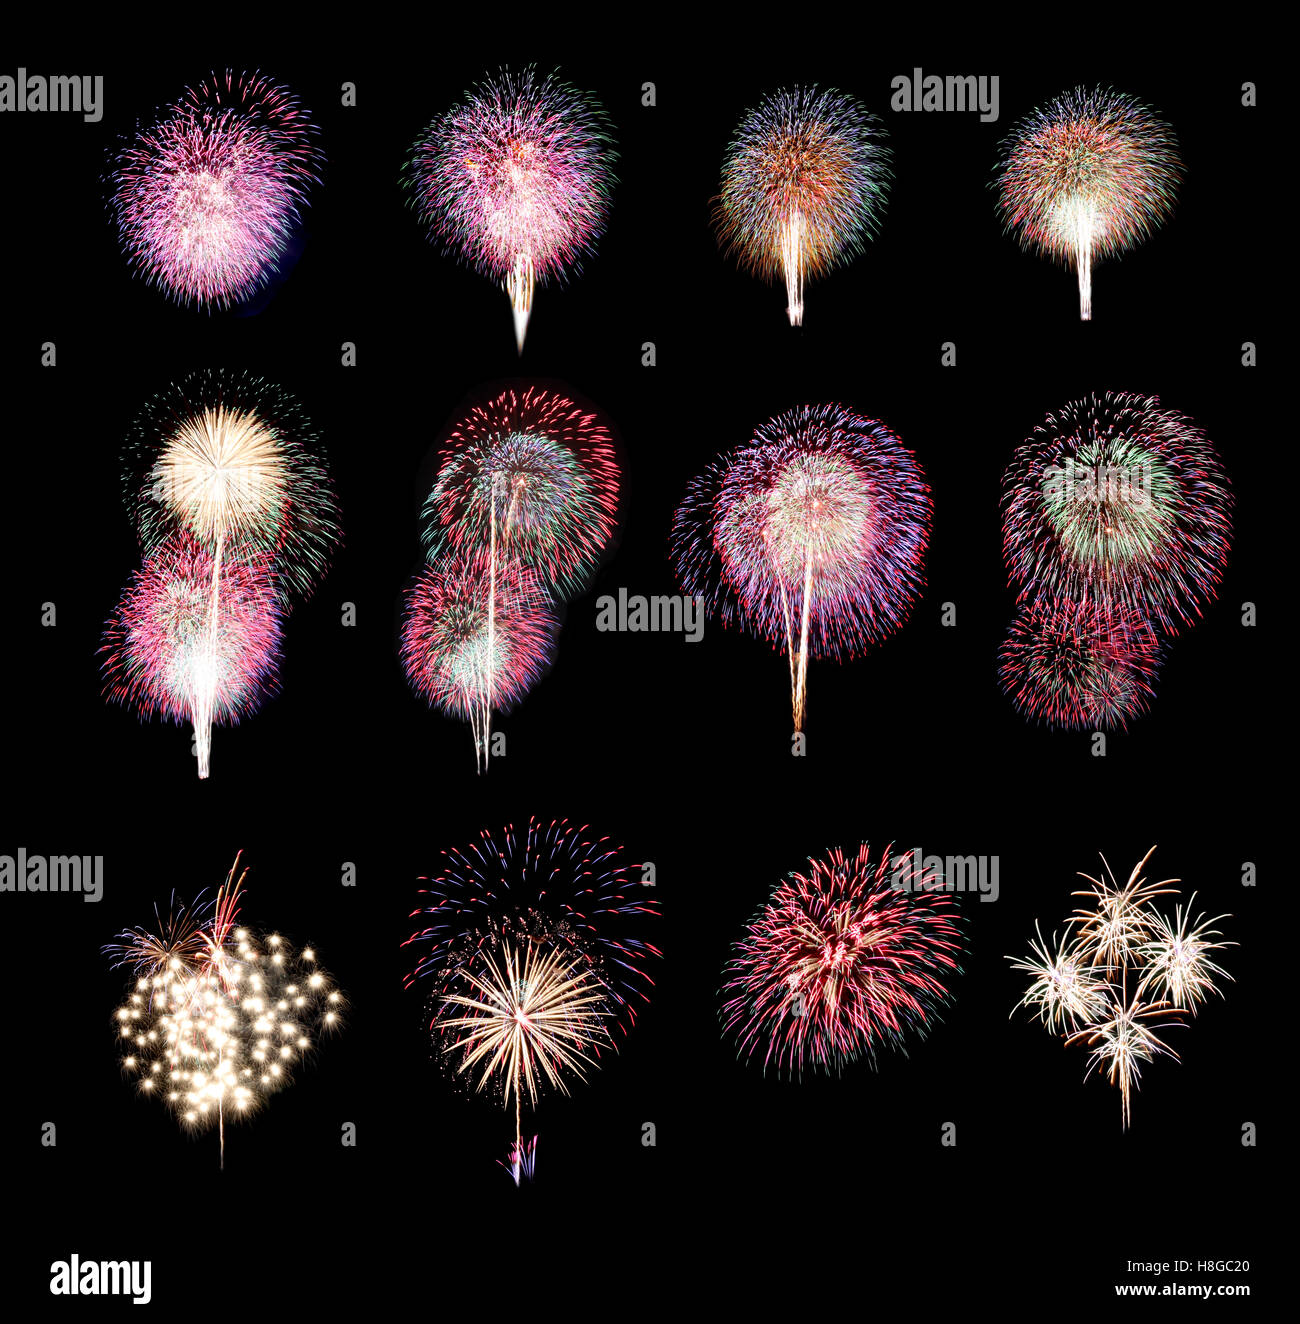 Variety of colors Mix Fireworks or firecracker Collections in the darkness background. Stock Photo